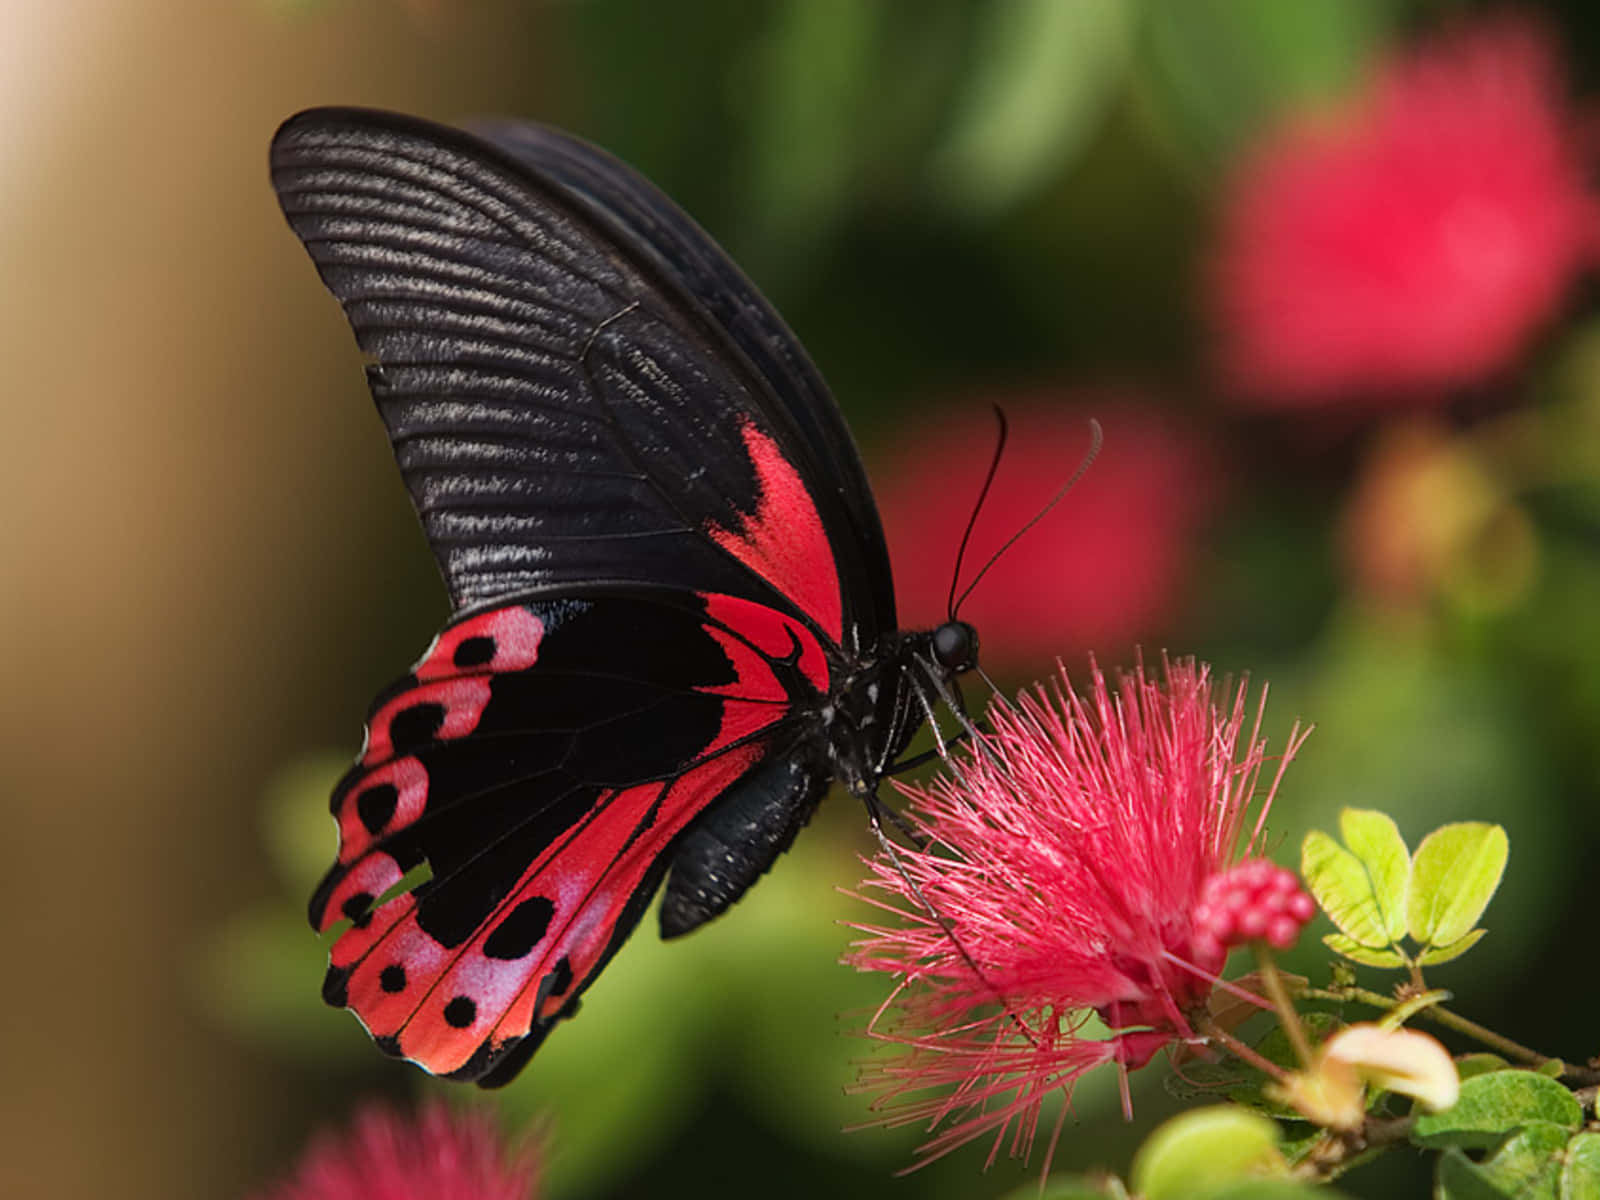 "A beautiful Red Butterfly sits up close against a white background." Wallpaper